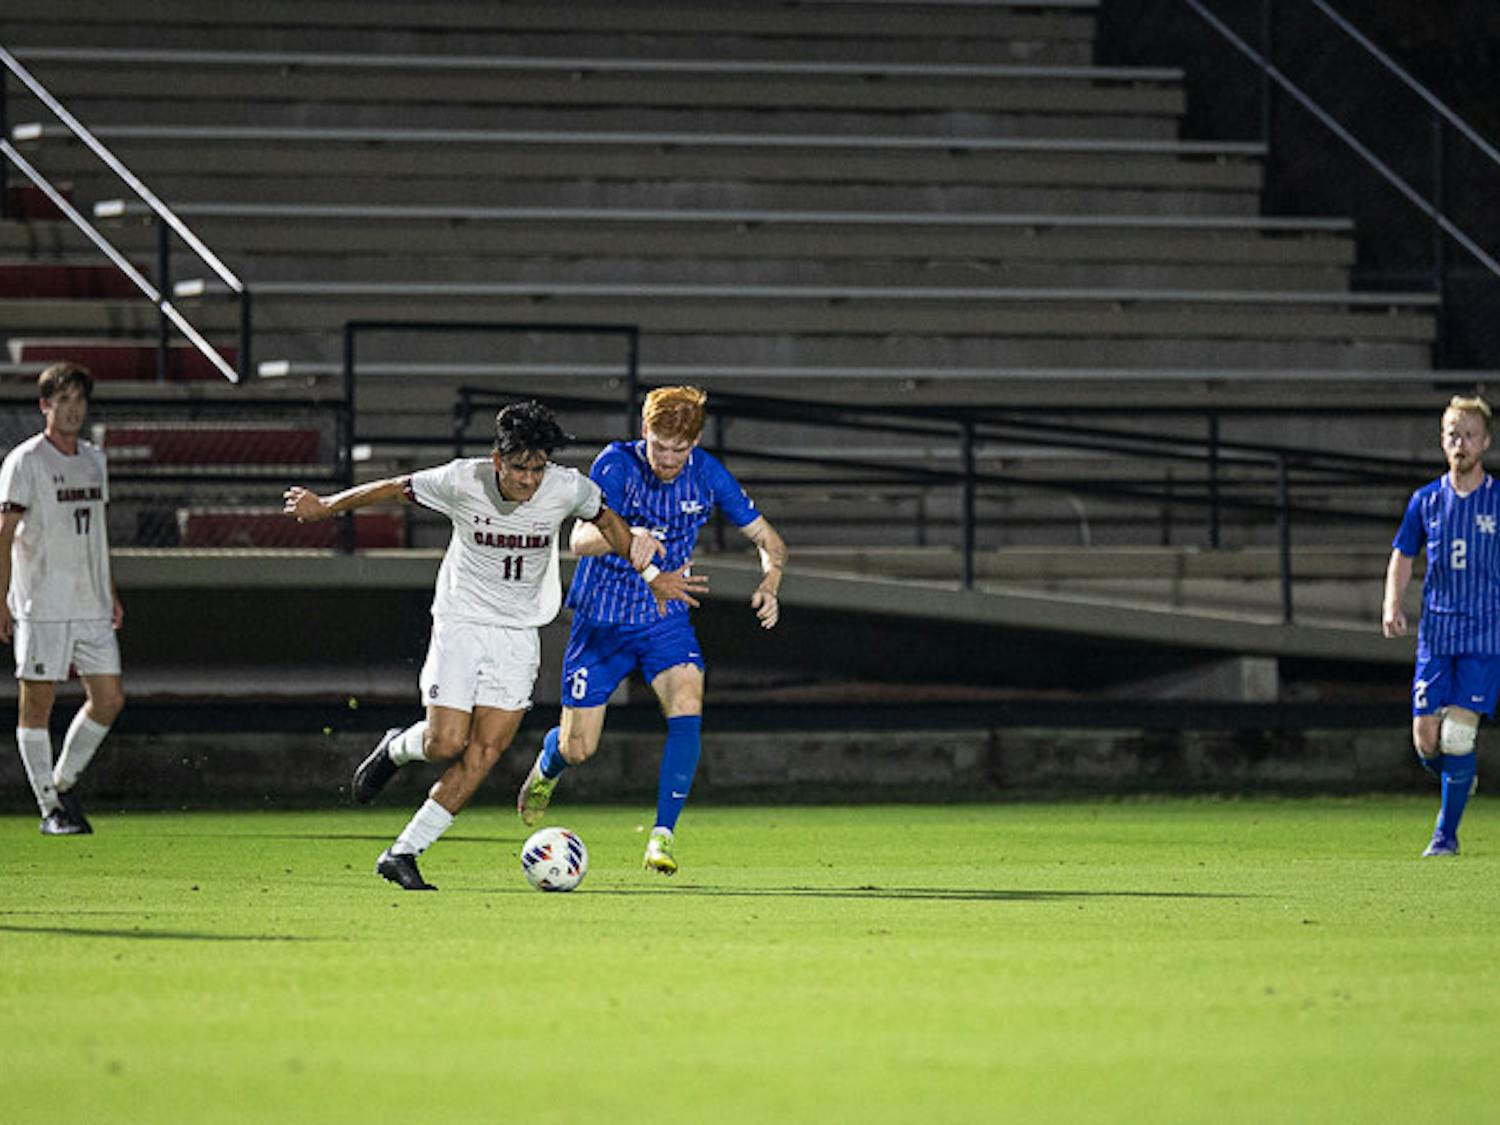 Freshman midfielder Rocky Perez attempts to steal the ball from a Kentucky midfielder during the Gamecocks matchup with the Wildcats on Nov. 1, 2022. Kentucky beat South Carolina 3-0.